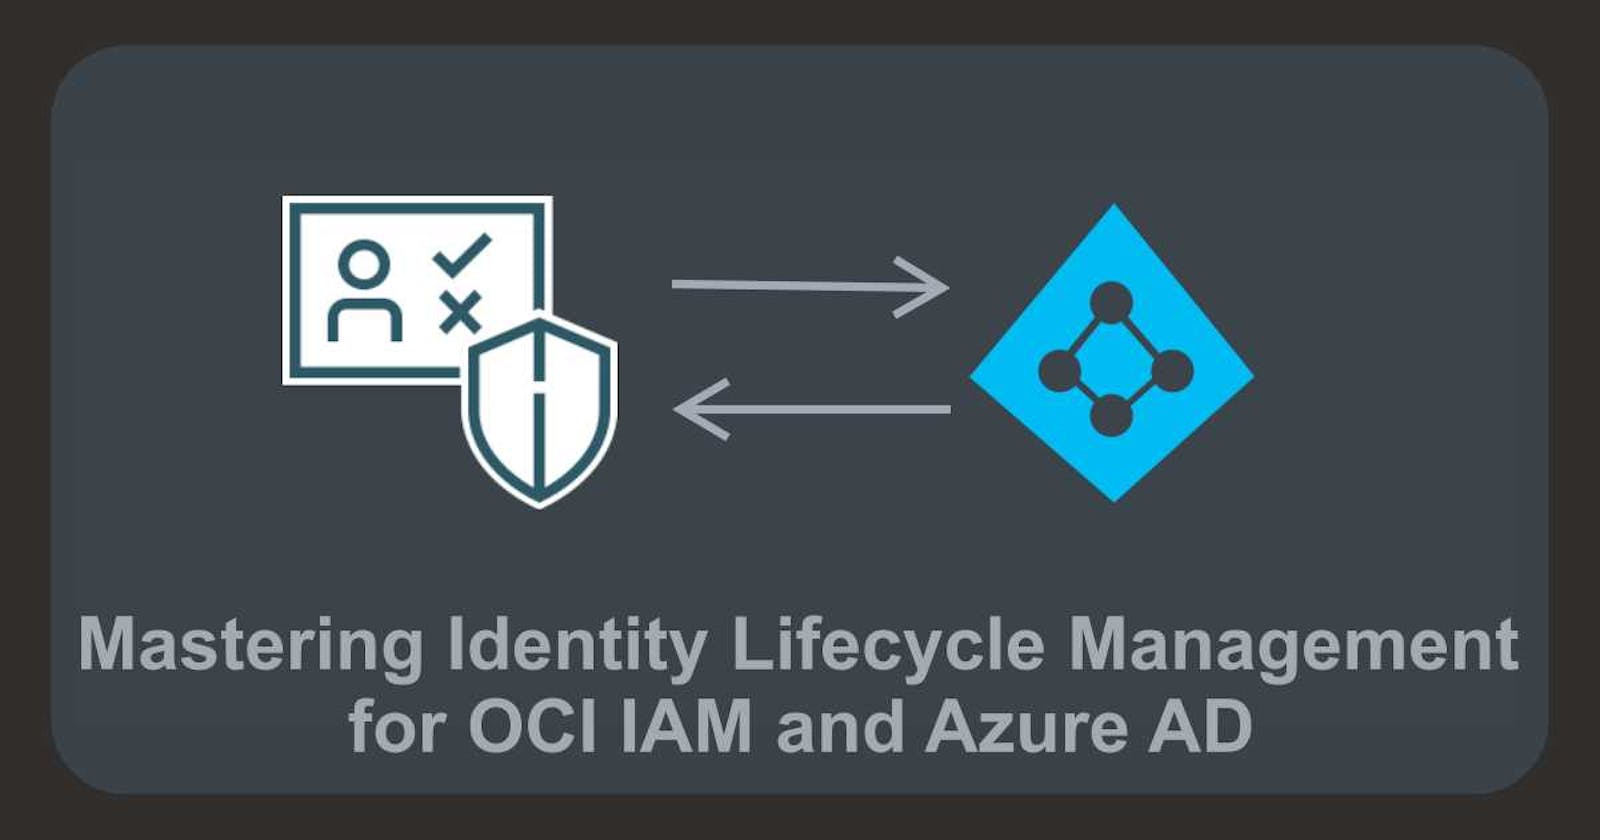 Mastering Identity Lifecycle Management for OCI IAM and Azure AD